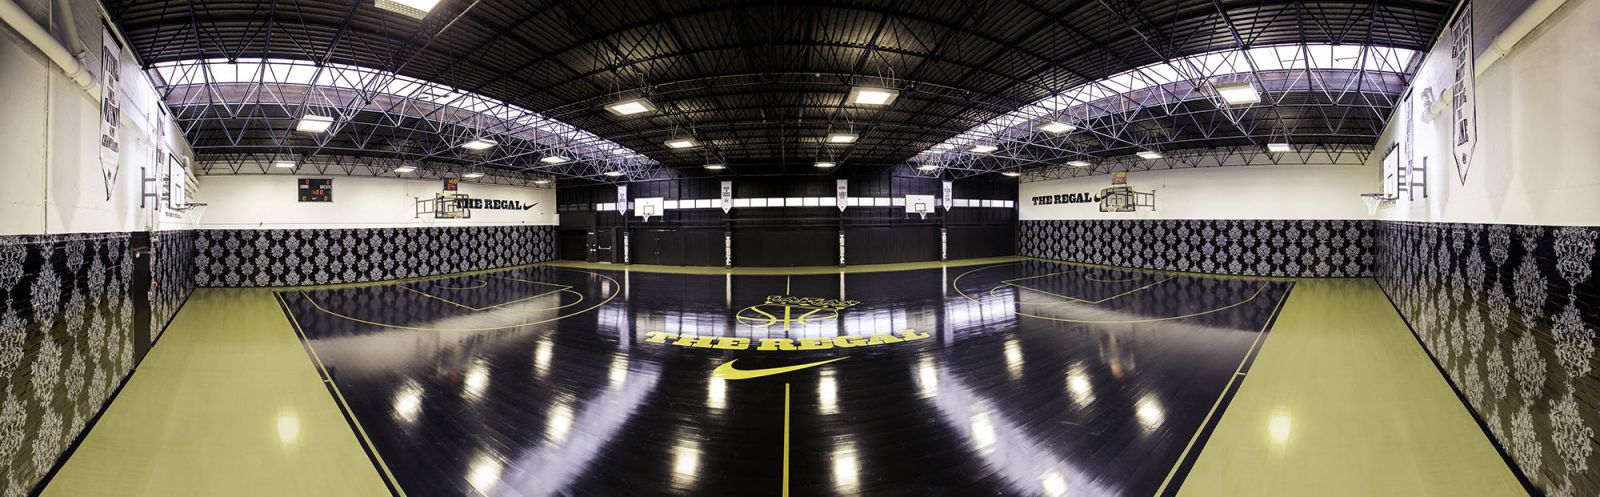 Nike Launches The Regal Basketball Court in London (9)